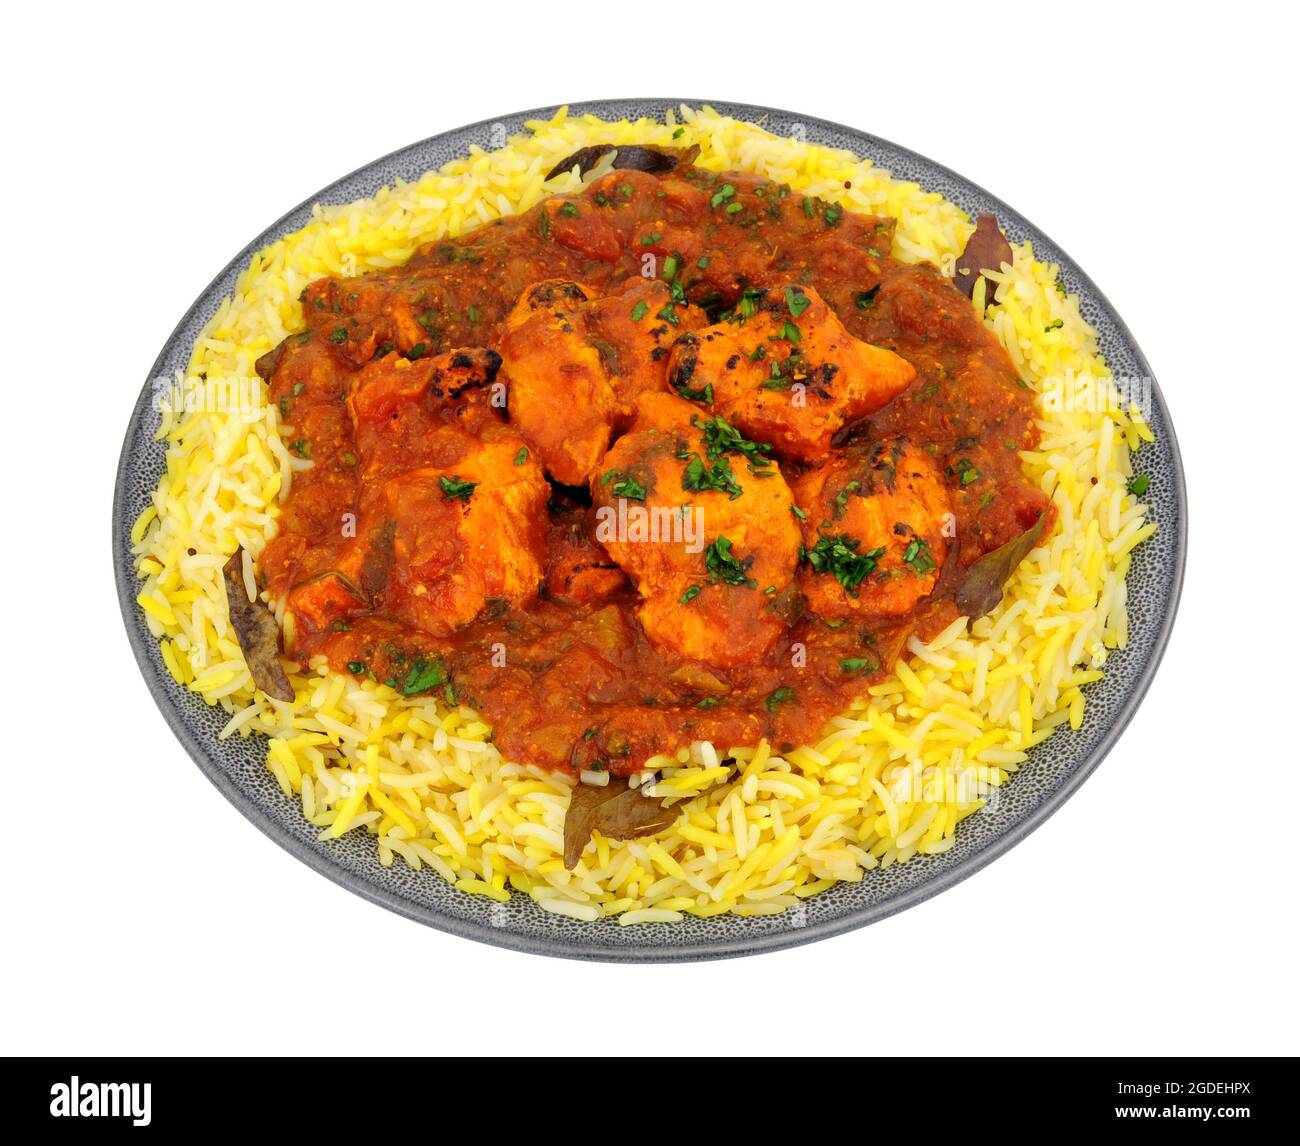 Indian chicken jalfrezi curry meal with fragrant pilau rice isolated on a white background Stock Photo